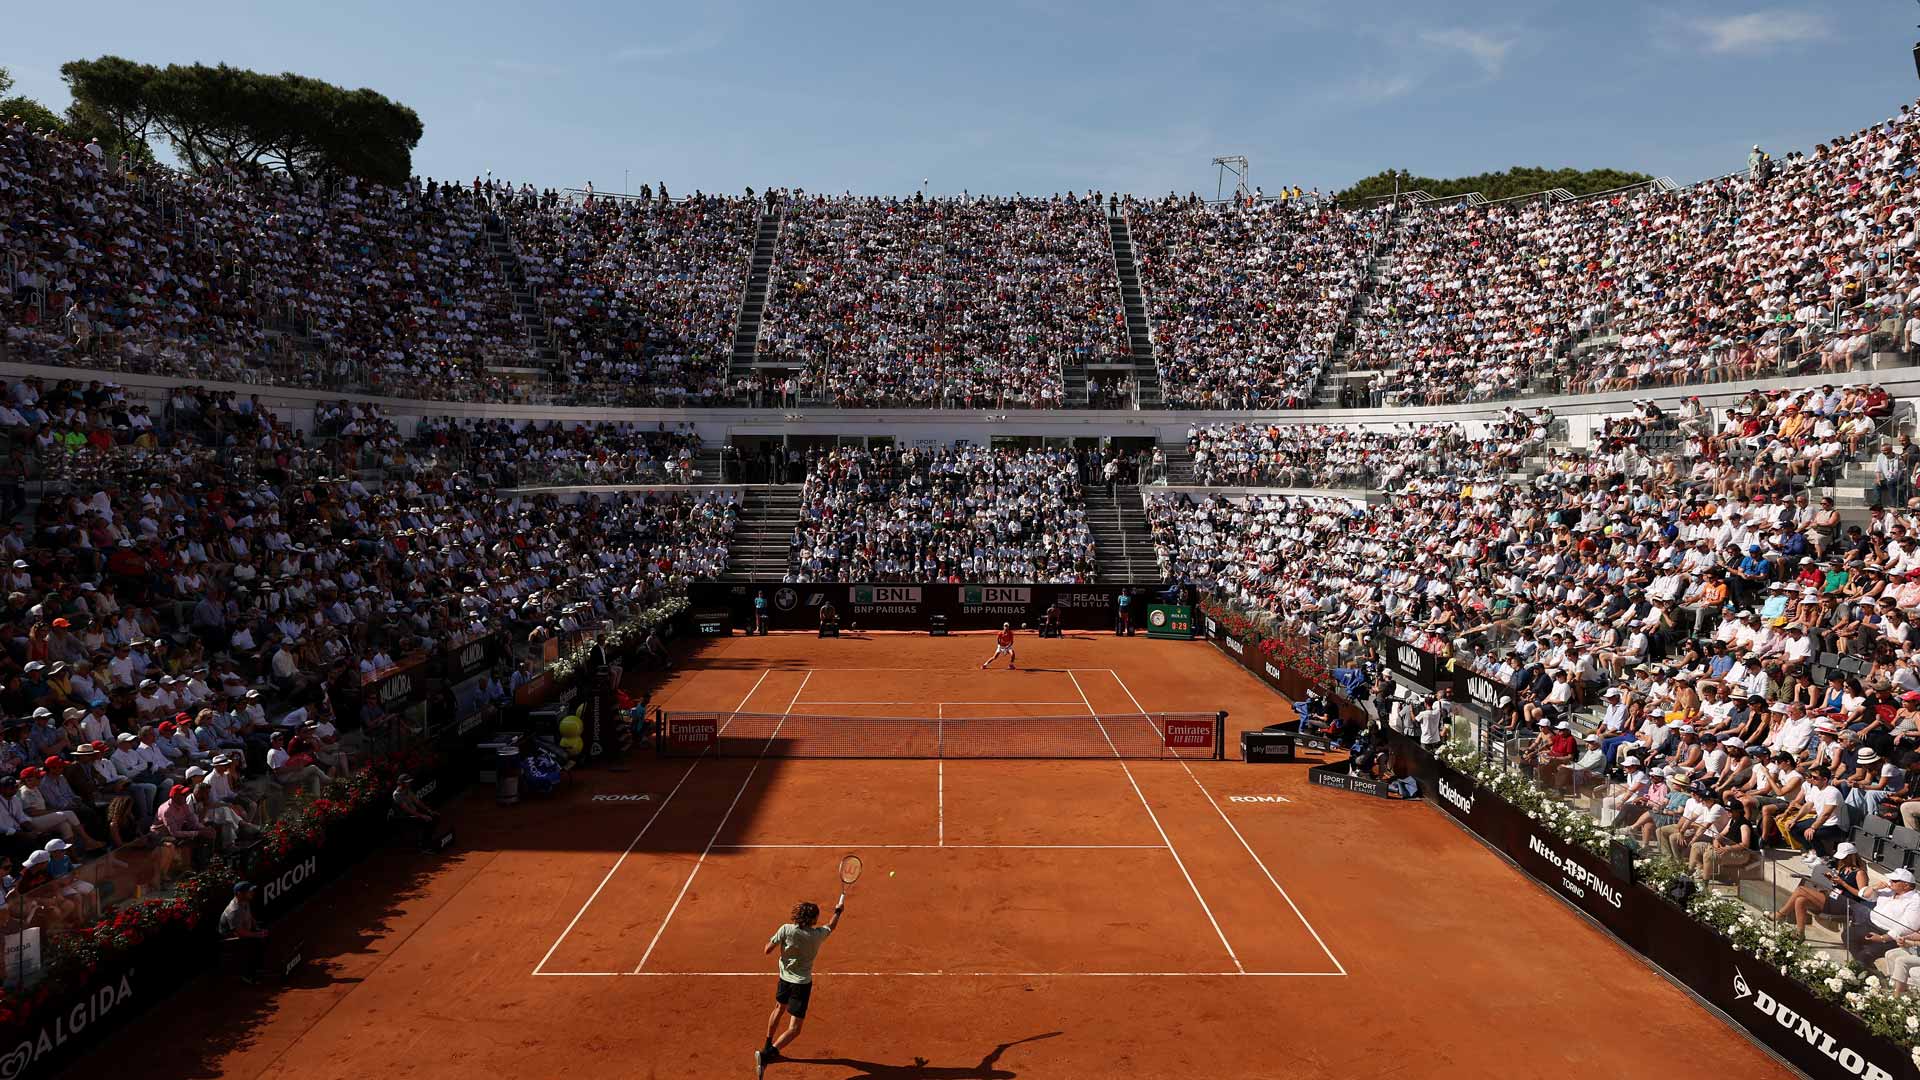 Italian Open tournament could be expanded from 64 to 96 players